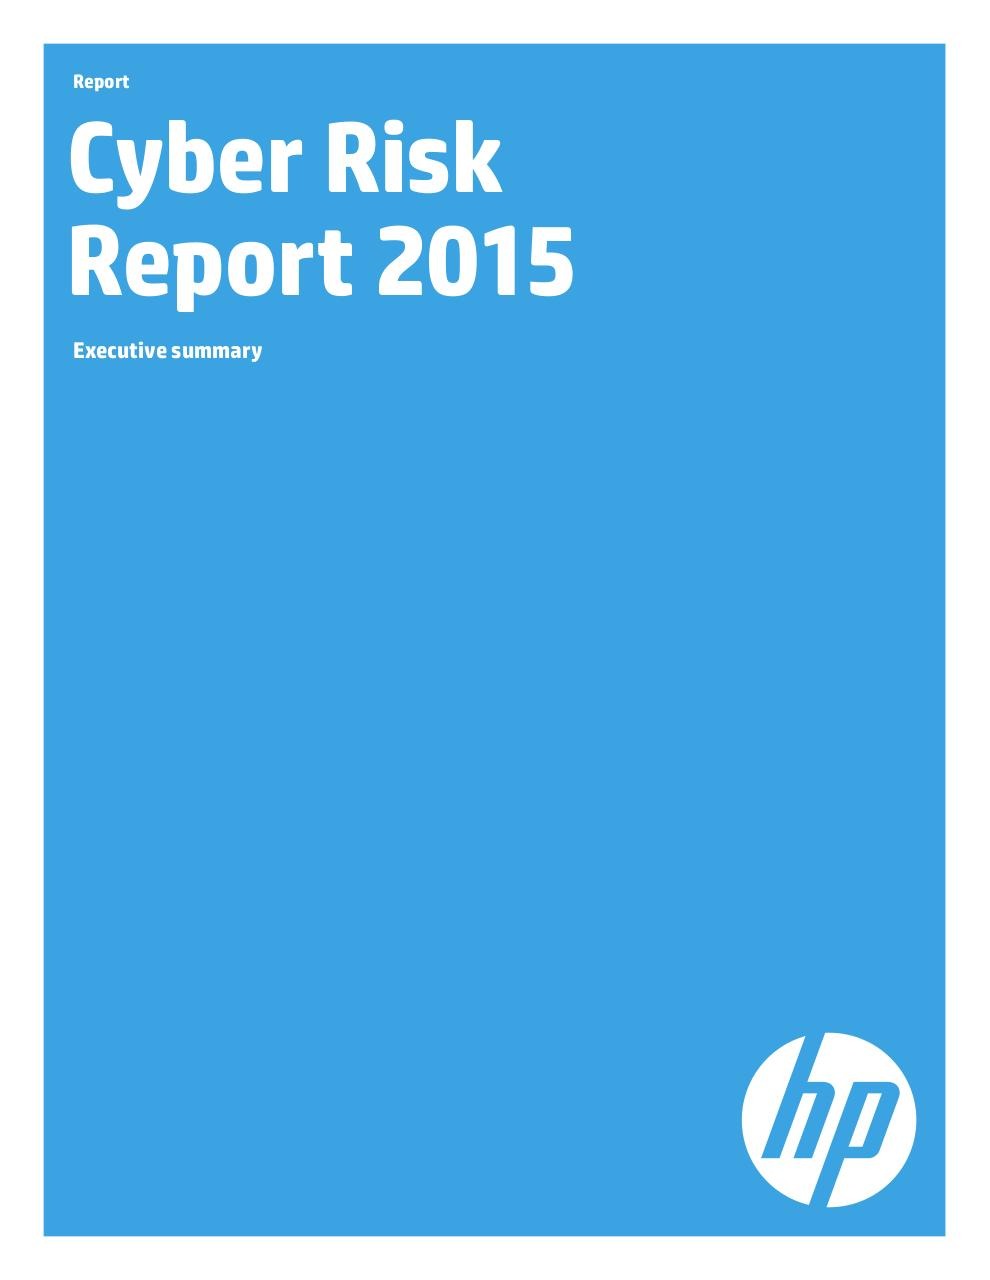 HP Cyber Risk Report 2015 Executive Summary.pdf - page 1/6